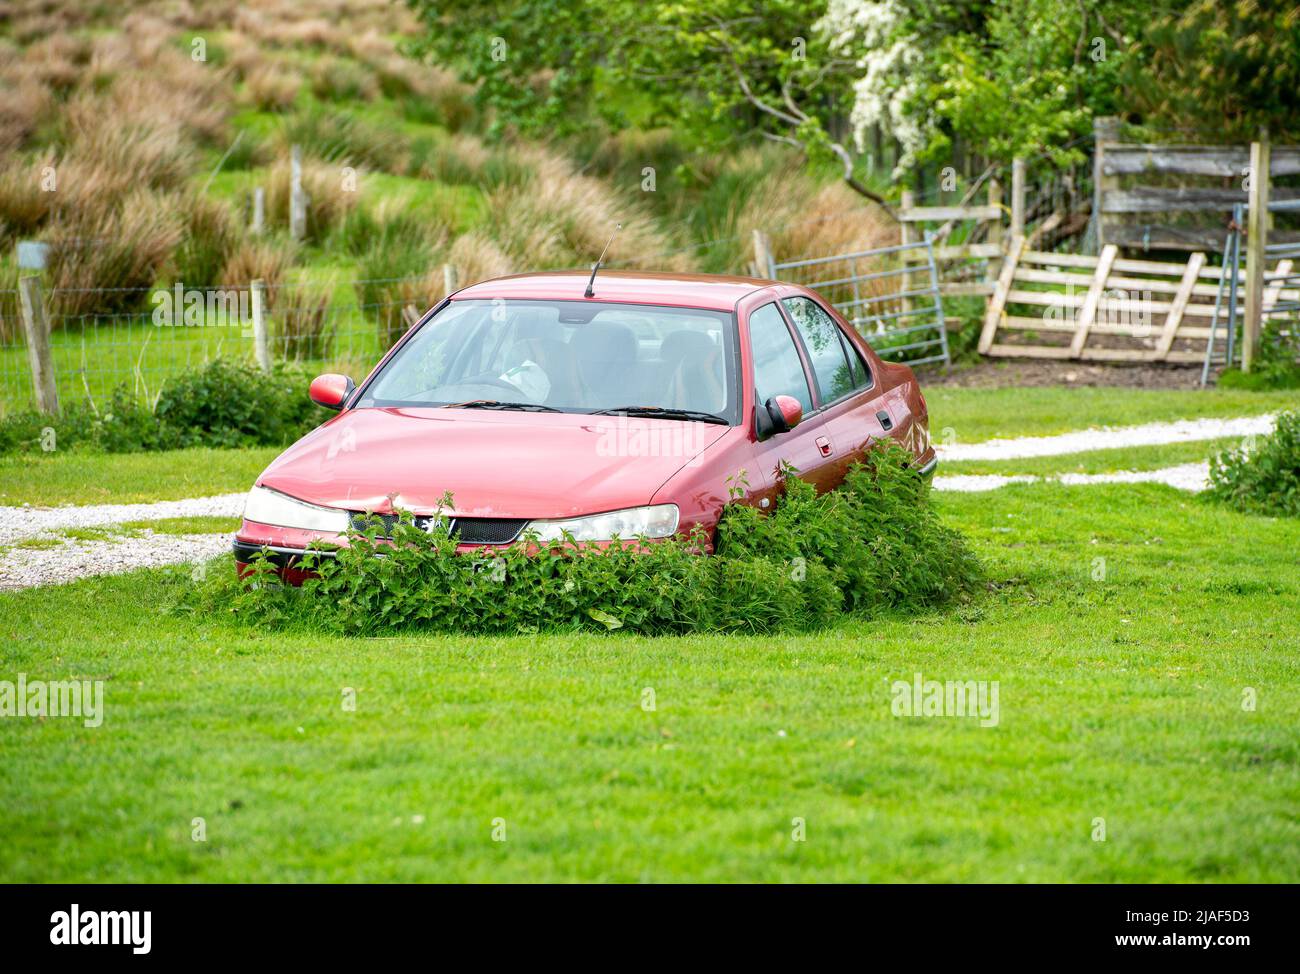 An old Peugeot car in a field, North Yorkshire, UK. Stock Photo